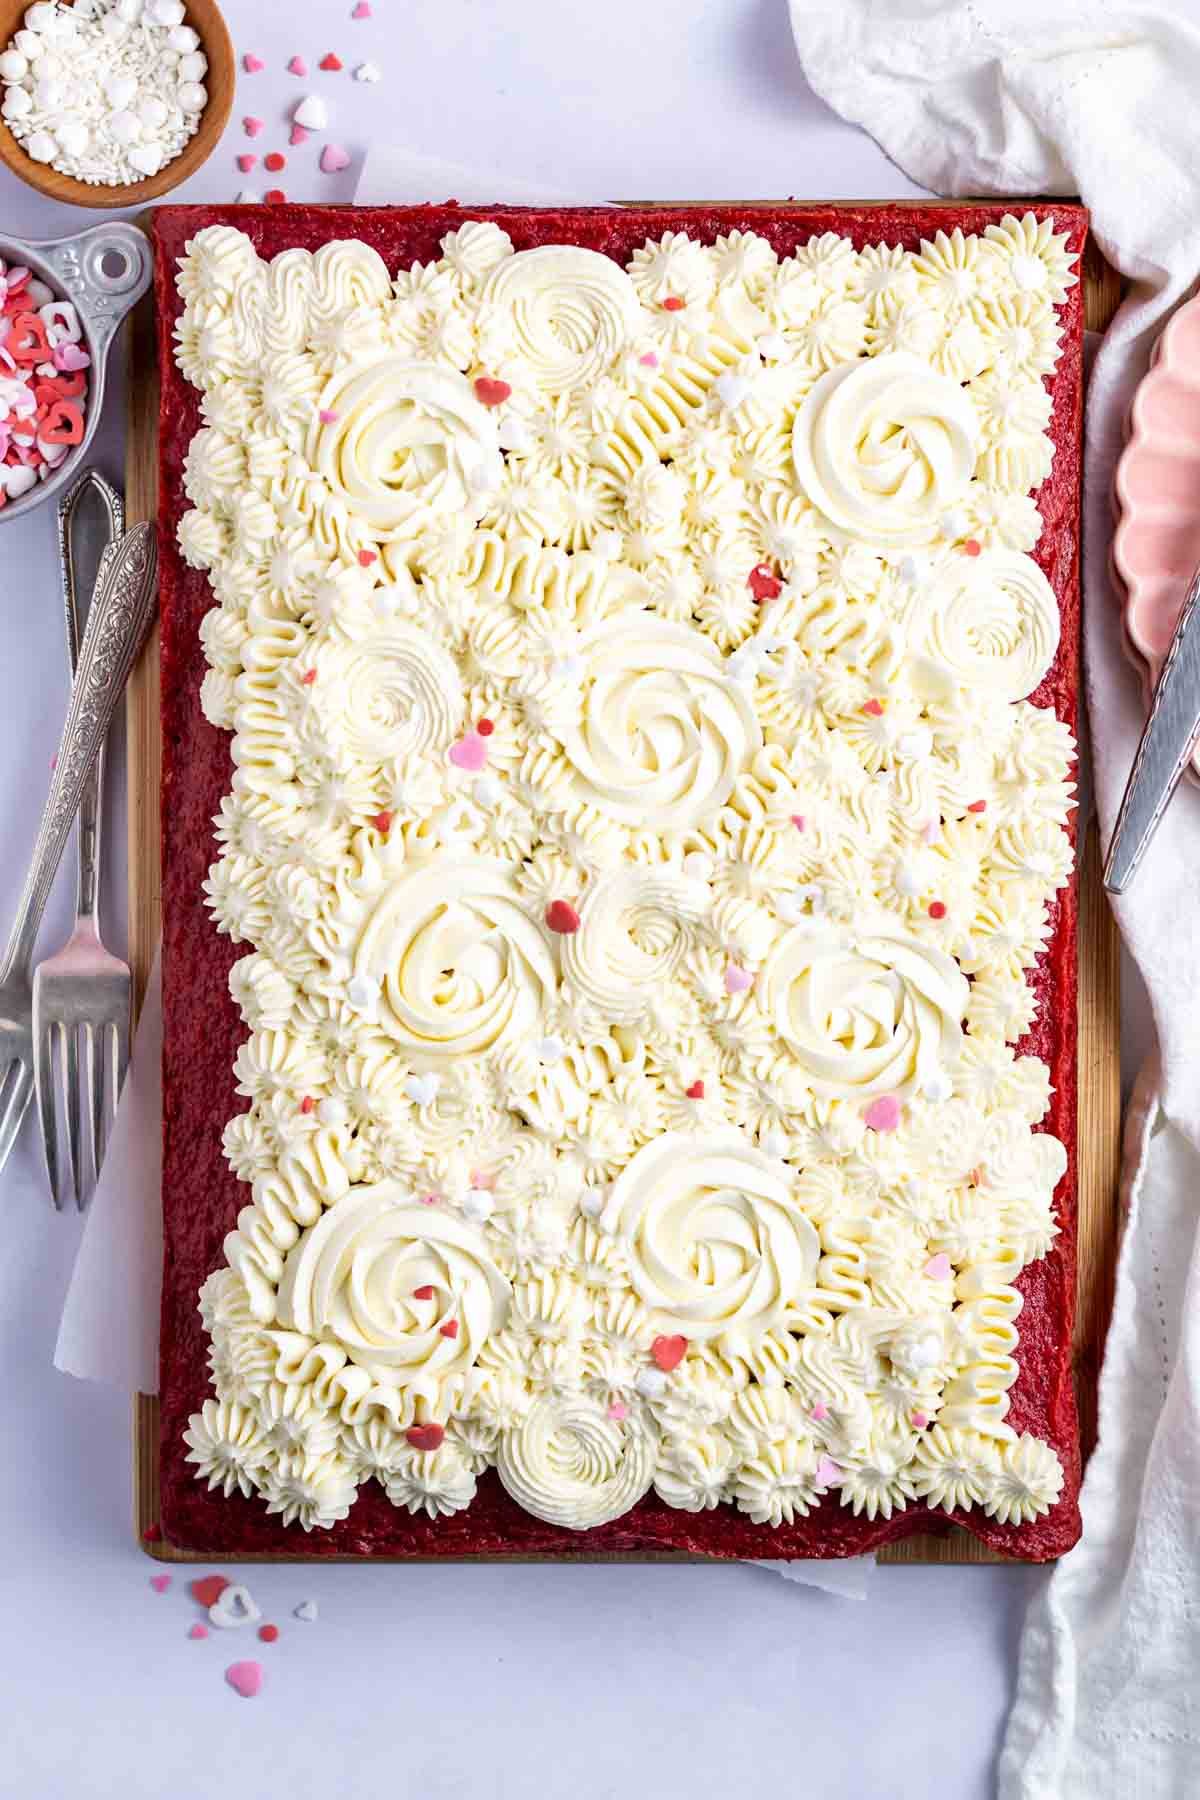 decorated cake with sprinkles and plates and forks